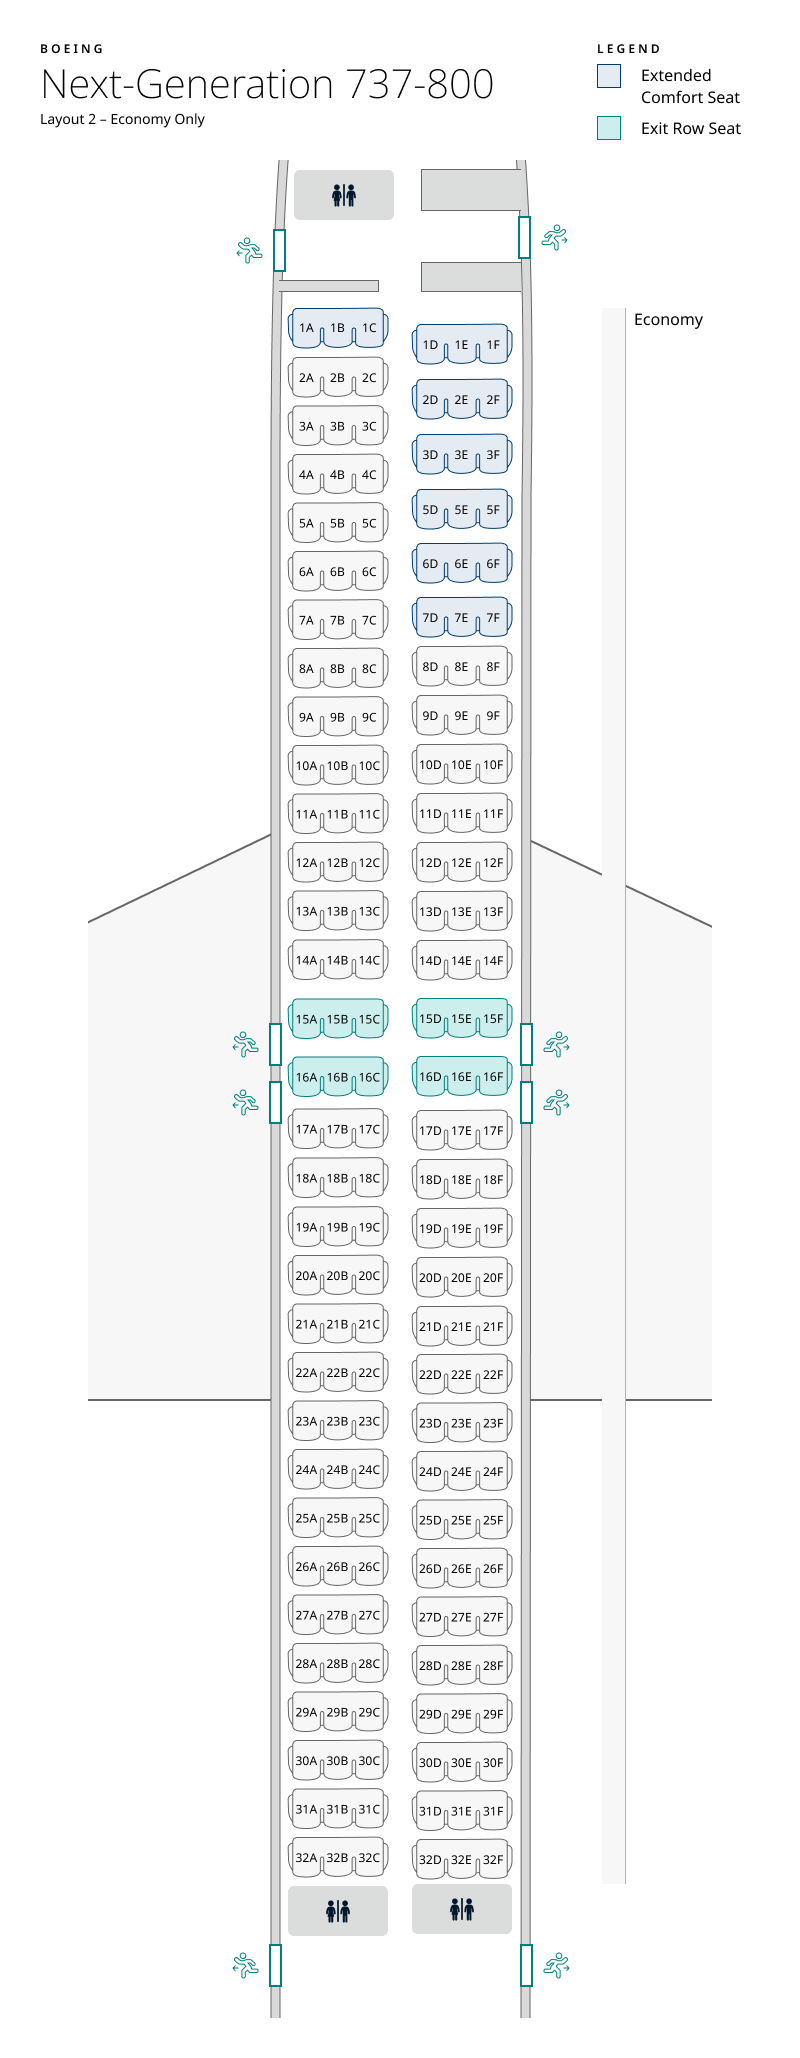 Seat map of 737-800 layout 2 – Economy only. Seat information available in table belo